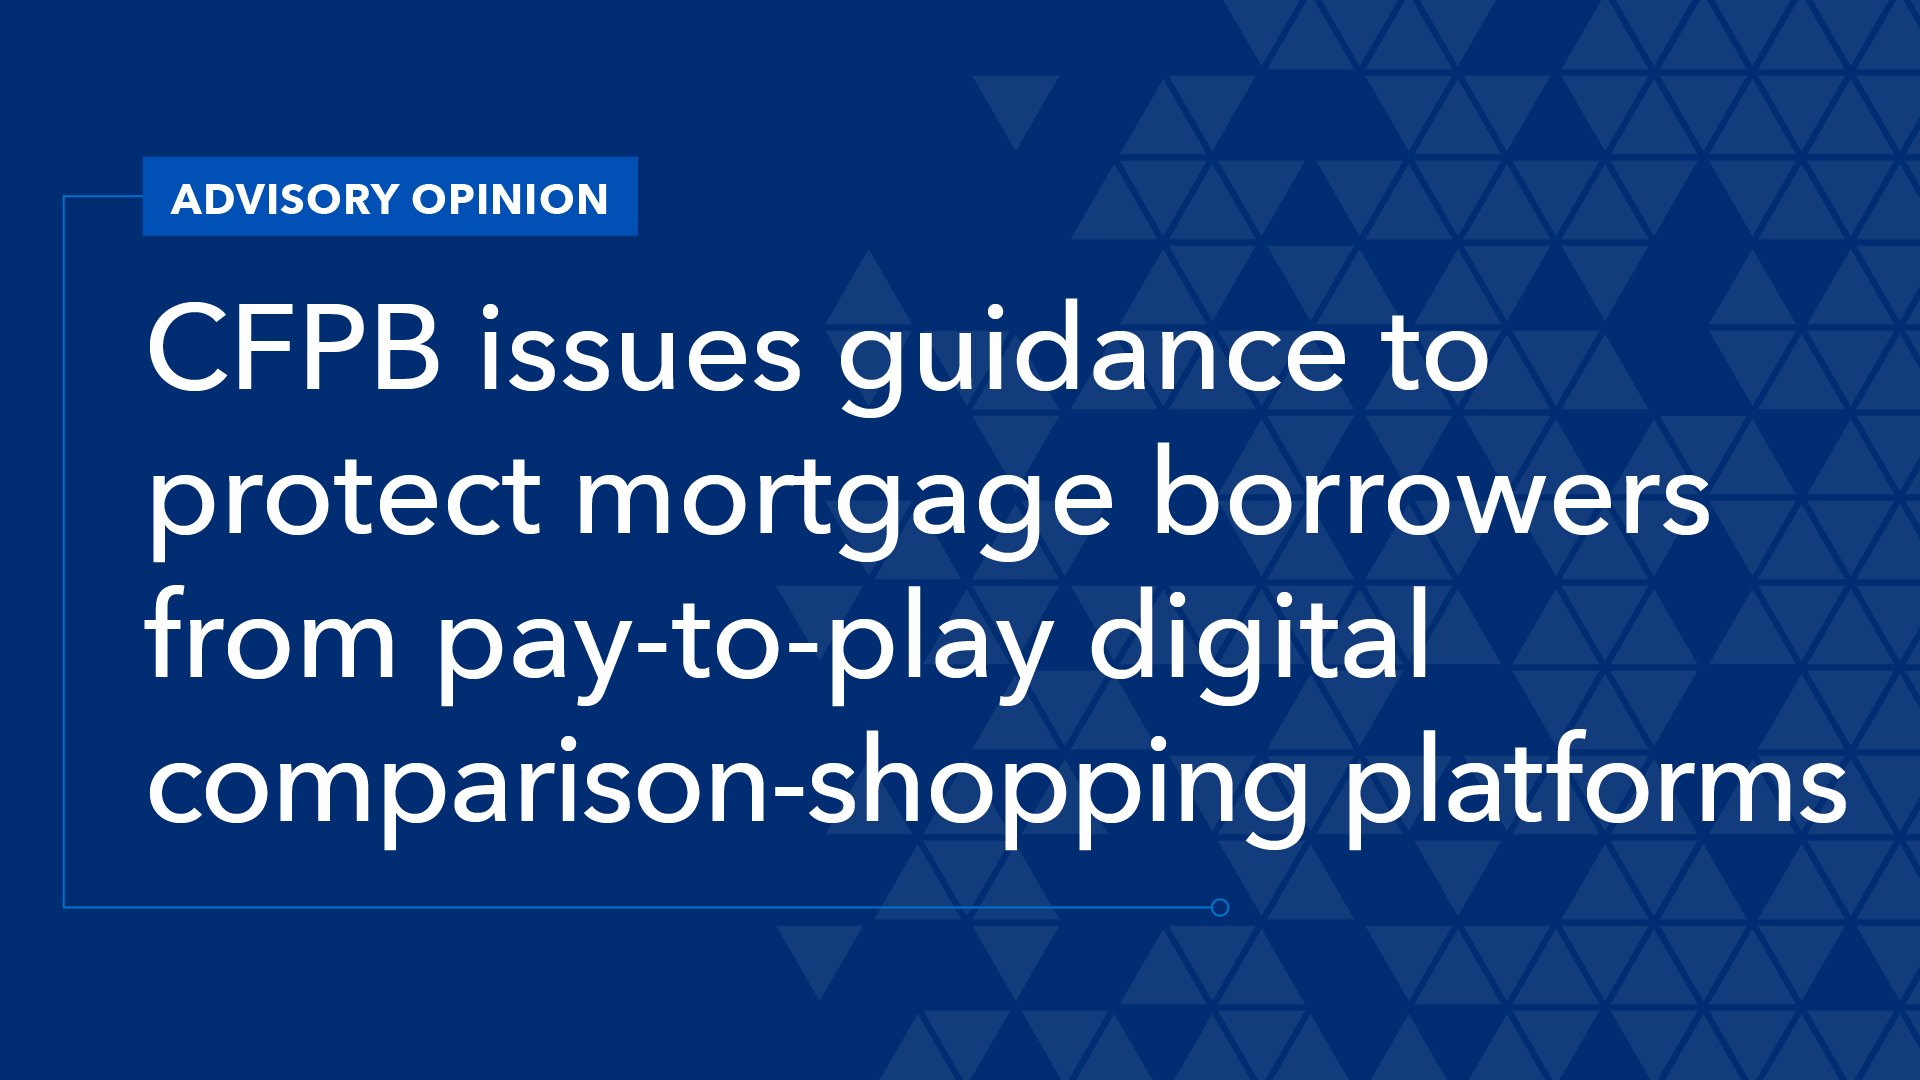 CFPB Issues Guidance to Protect Mortgage Borrowers from Pay-to-Play Digital Comparison-Shopping Platforms